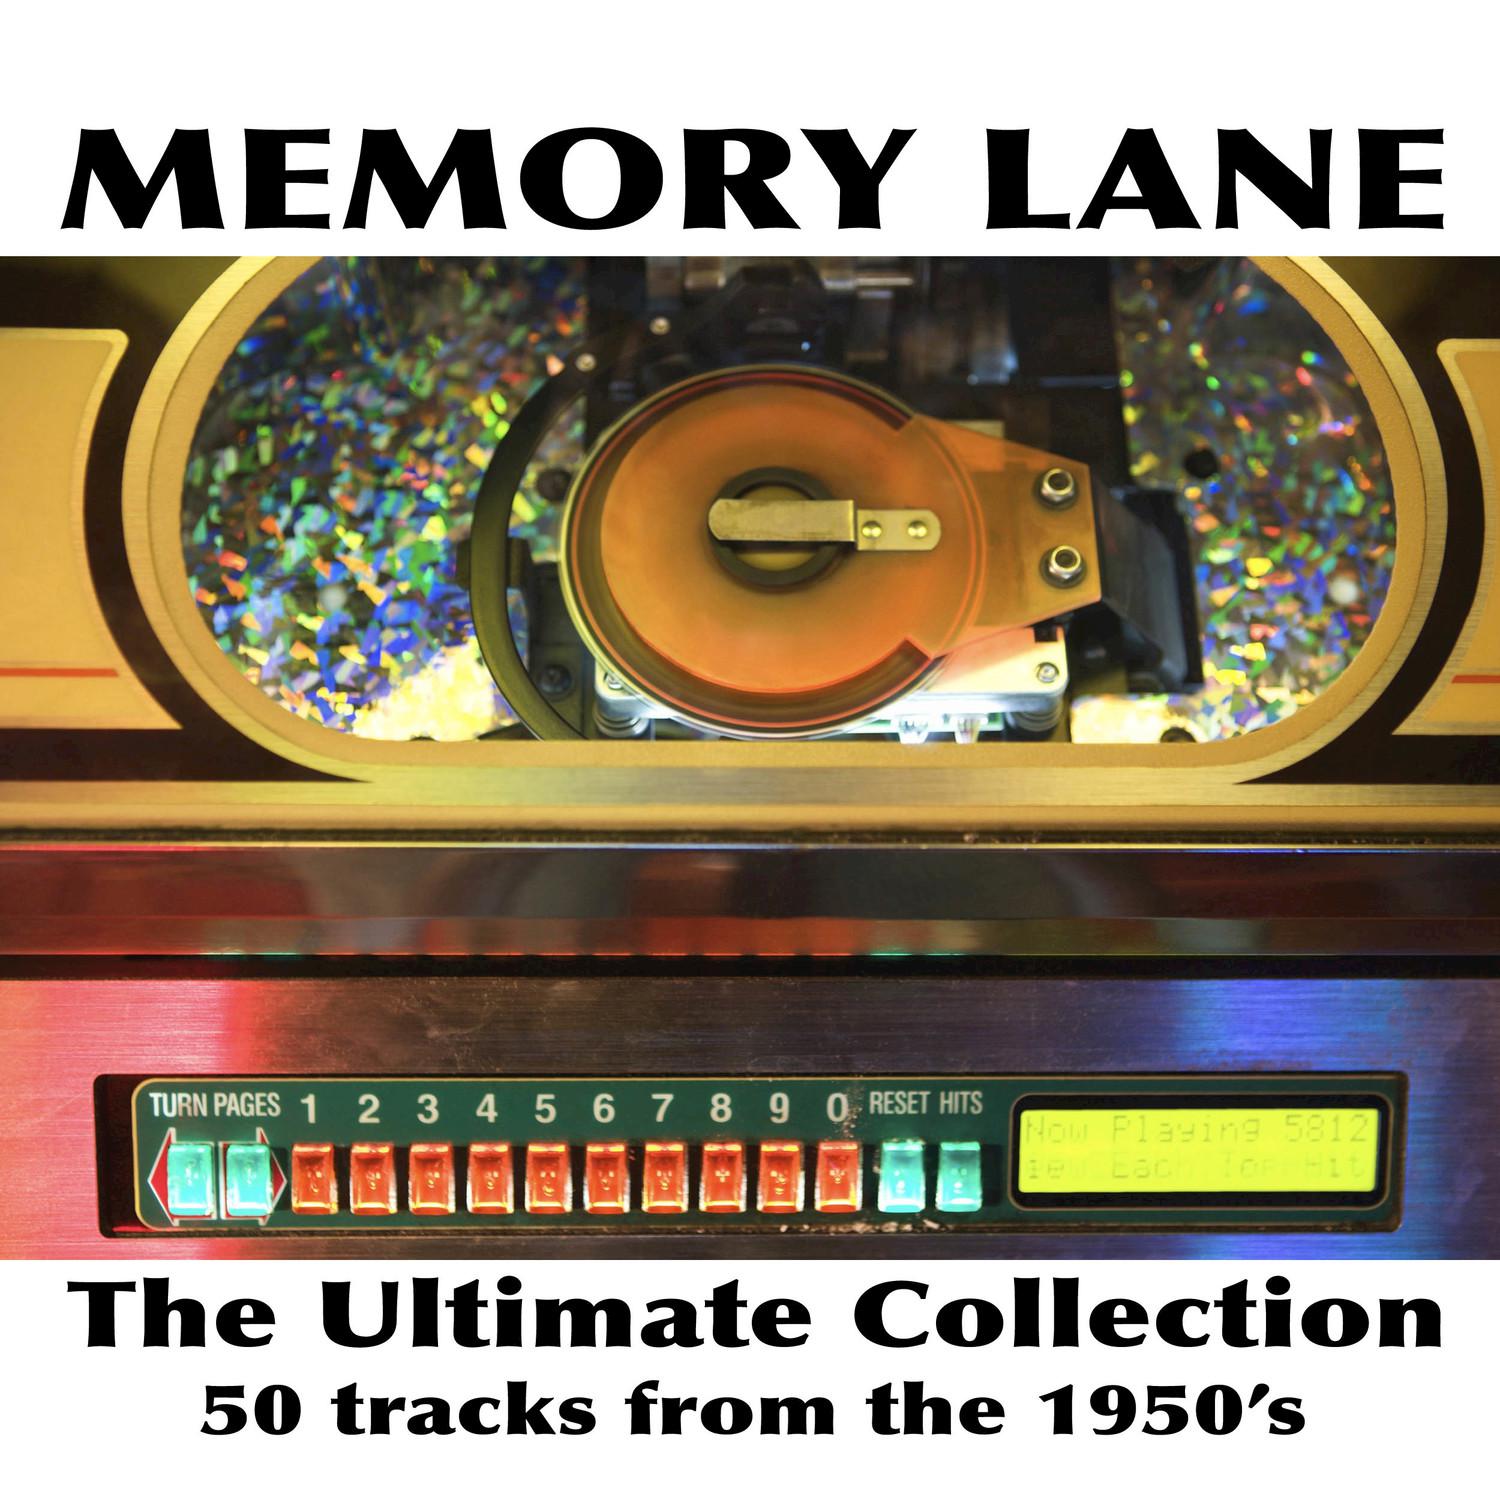 Memory Lane the Ultimate Collection 50 tracks from the 1950's